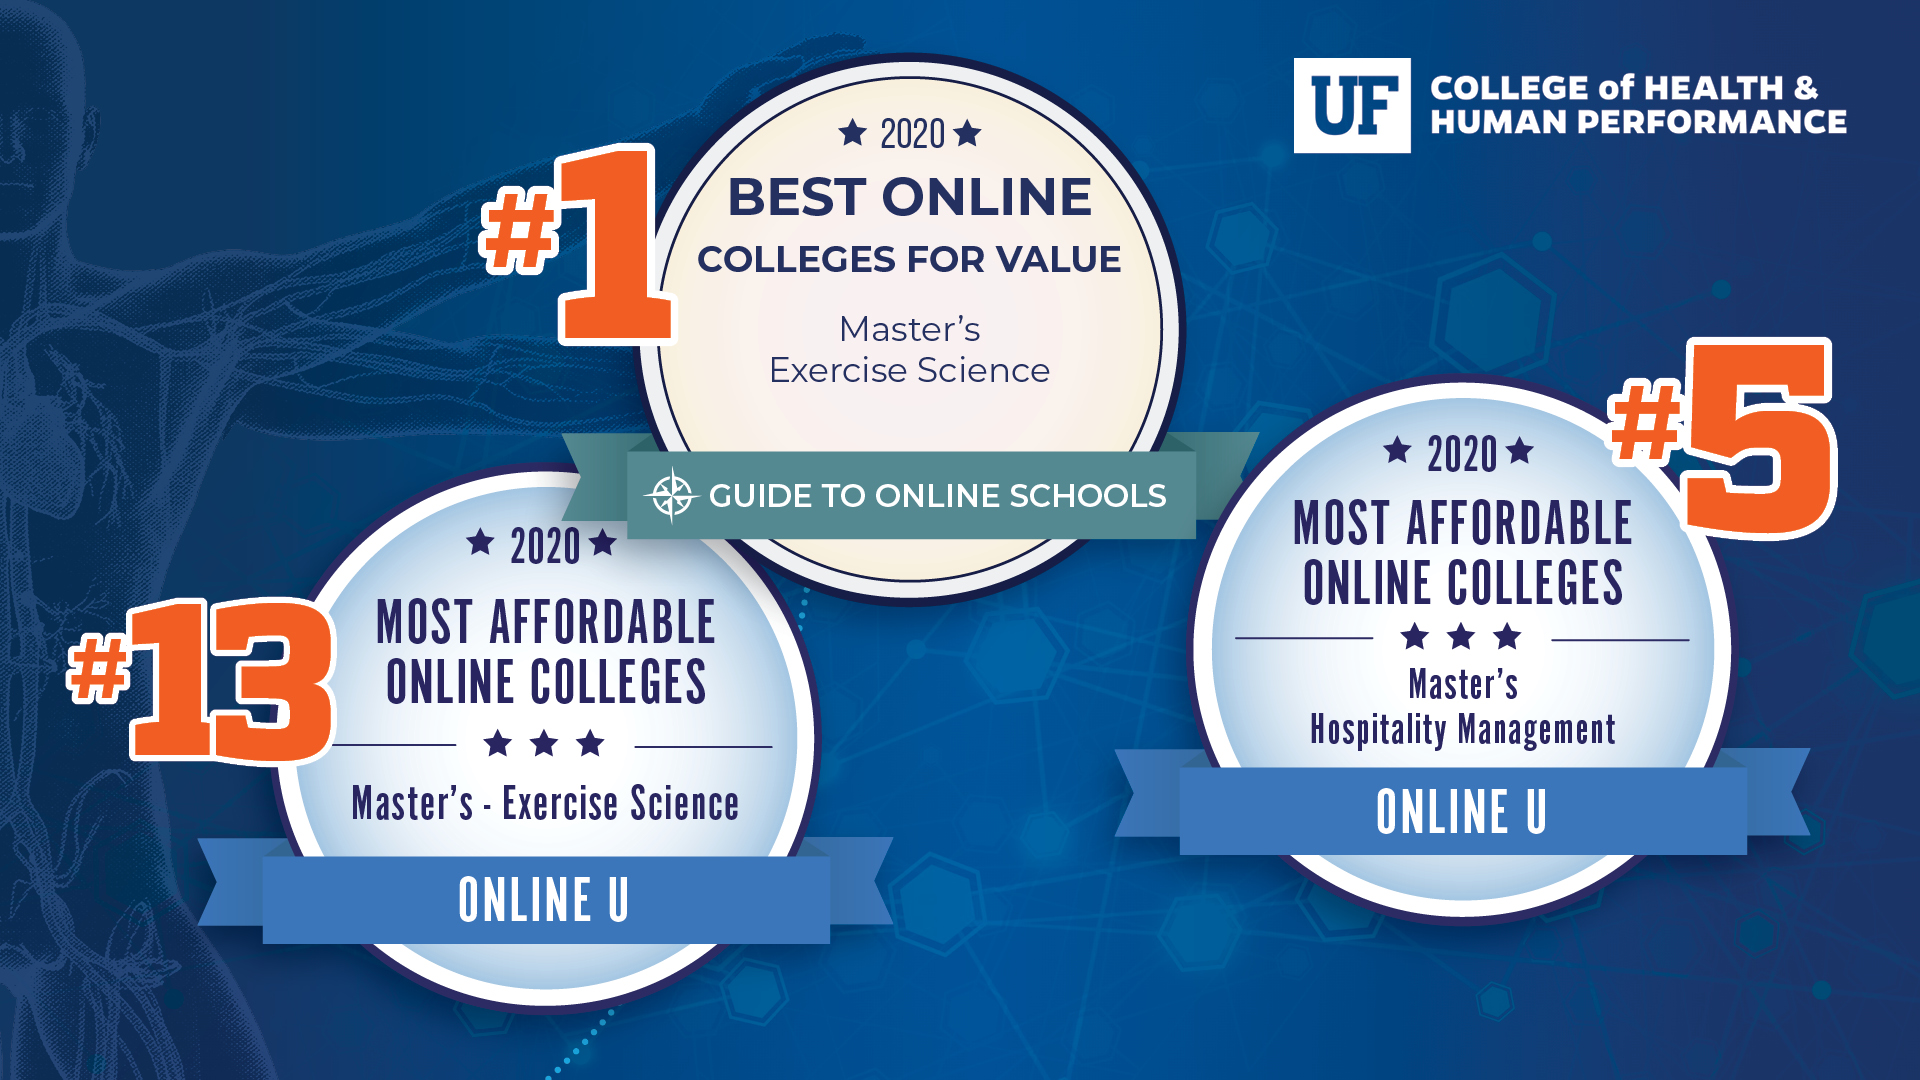 Online APK Master’s Program Takes Top Ranking; Two Programs in Top 15 for Affordability